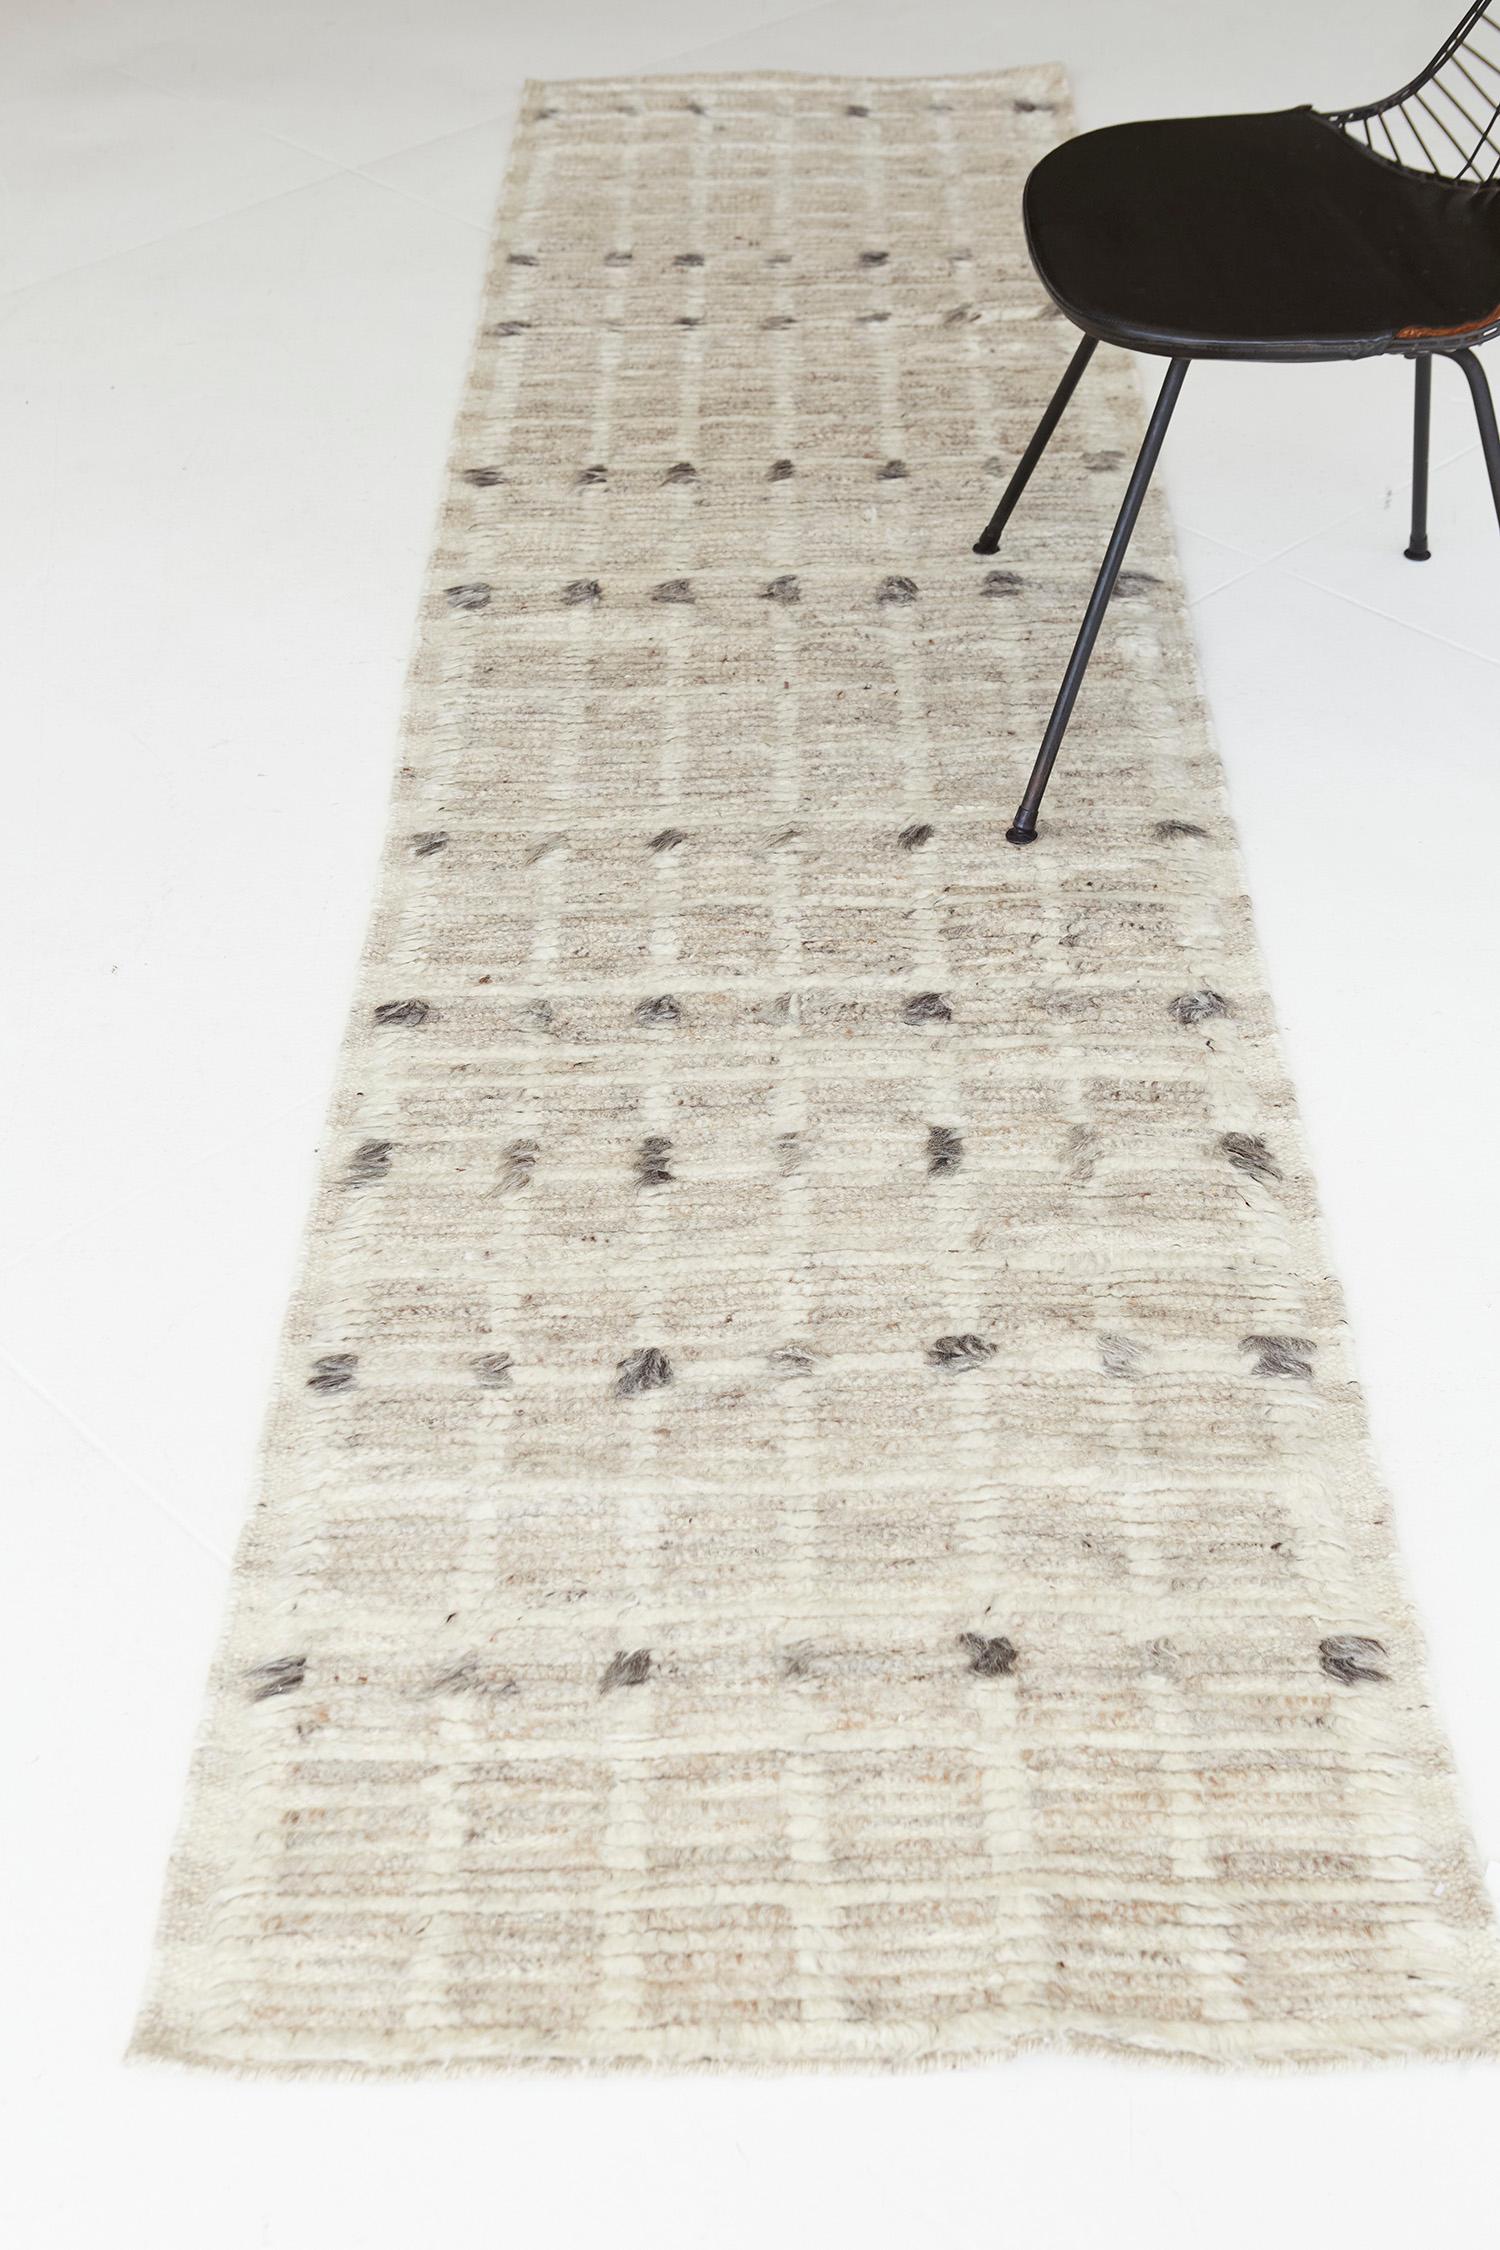 Amihan is a beautifully detailed pile weave from our Atlas Collection. The delicate checkered and ribbed style rug with neutral tones gives a rich and charming feel. Repeating ash pile detailing also brings a bold and noteworthy uniqueness to this